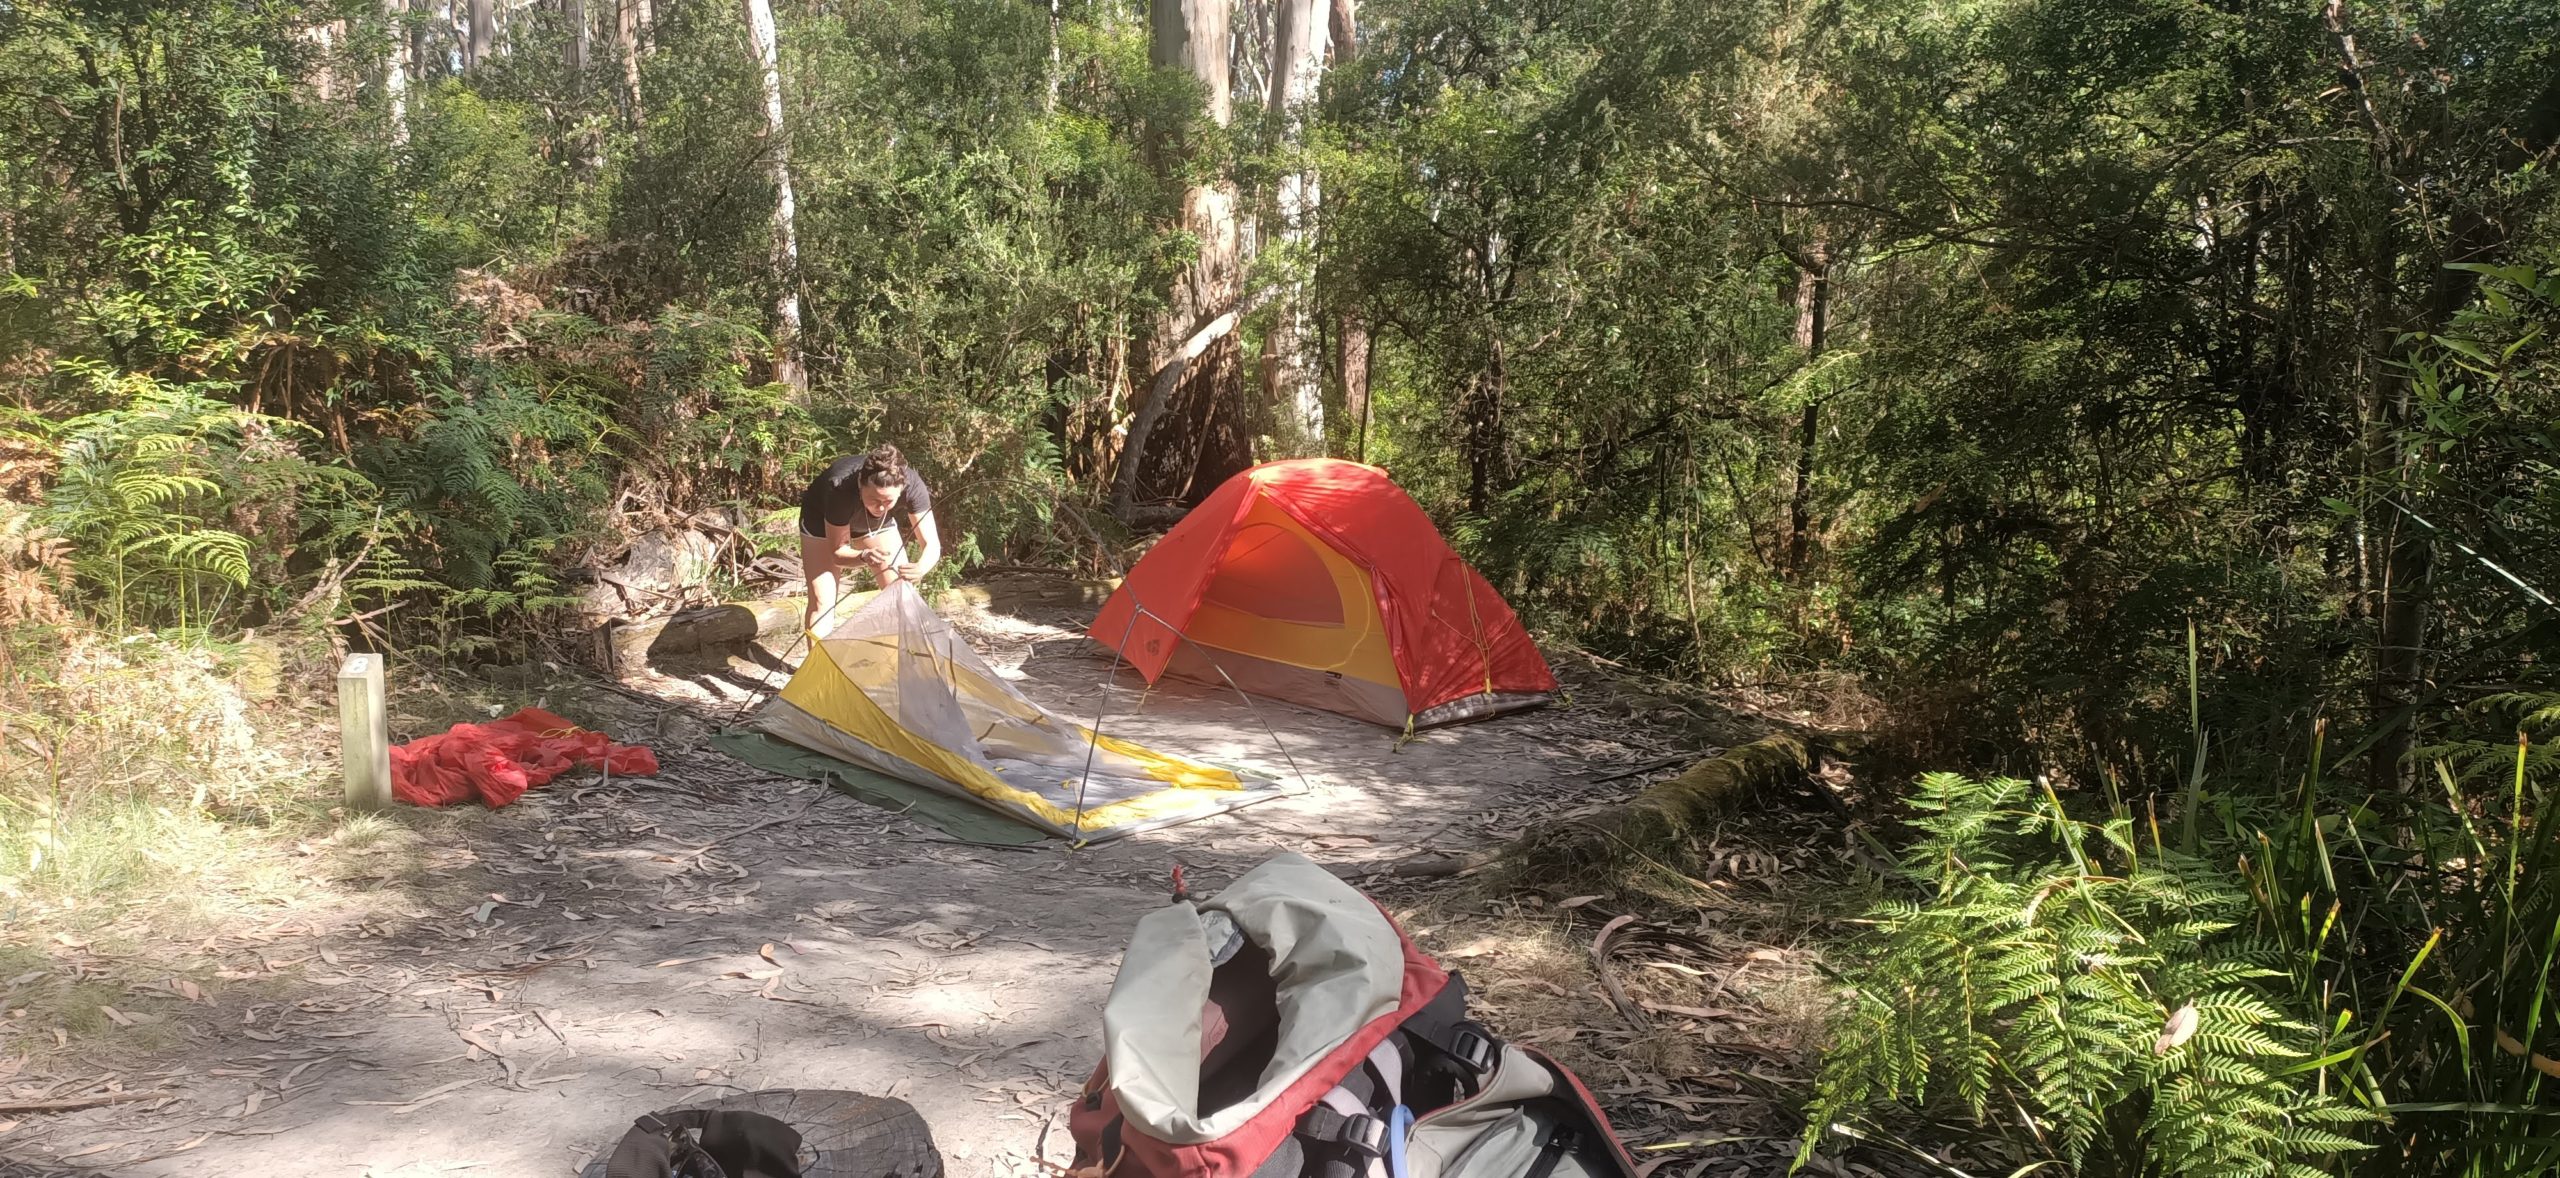 Midway through setting up two red tents and various hiking equipment set up across bare dirt that is surrounded by coastal bush. There is a hiking pack in the foreground of the photo.